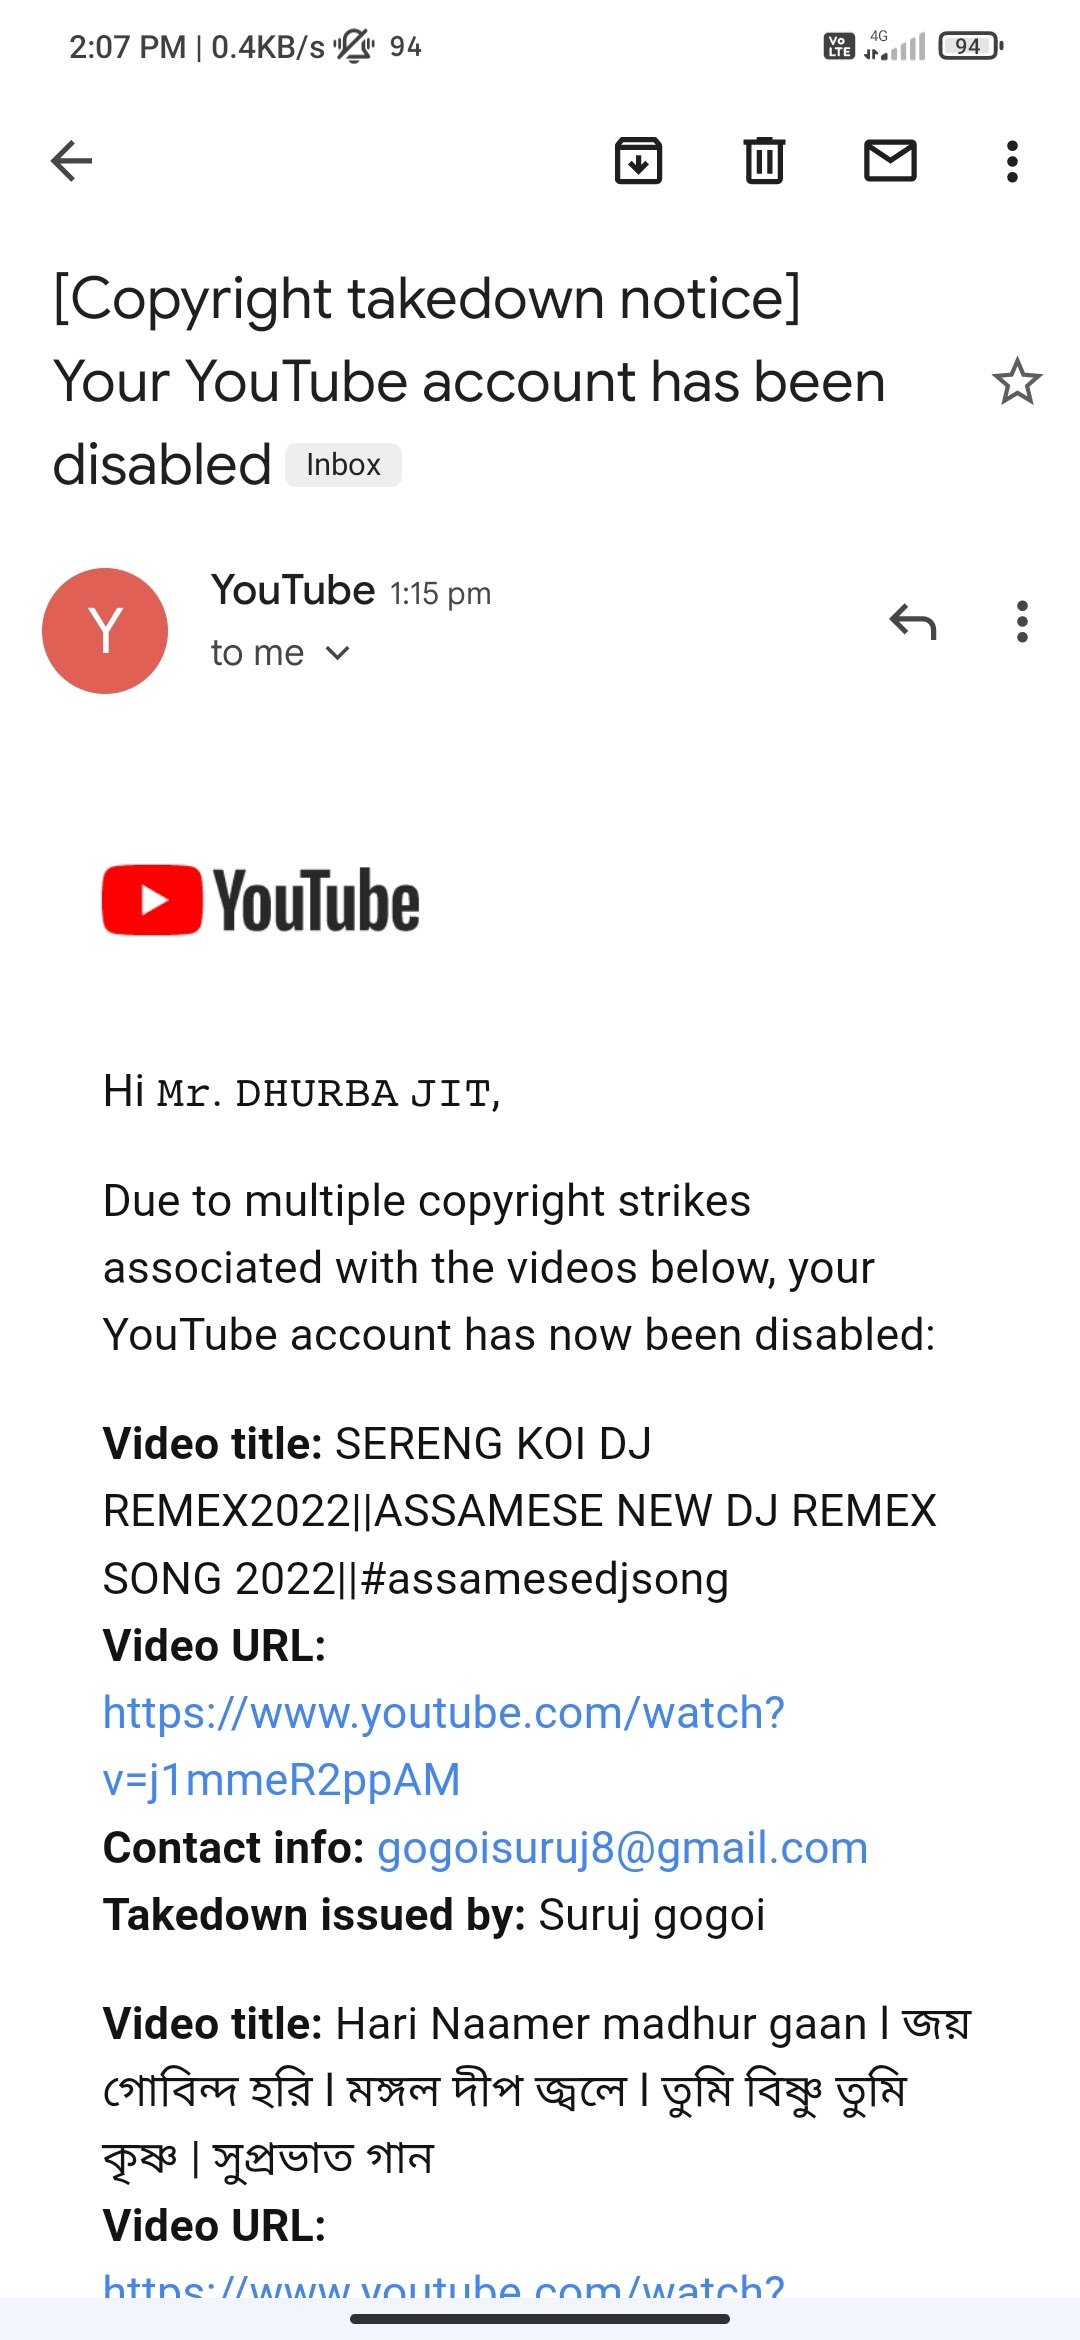 My  account has been disabled. please recover my  channel. I  delete all copyright vide -  Community